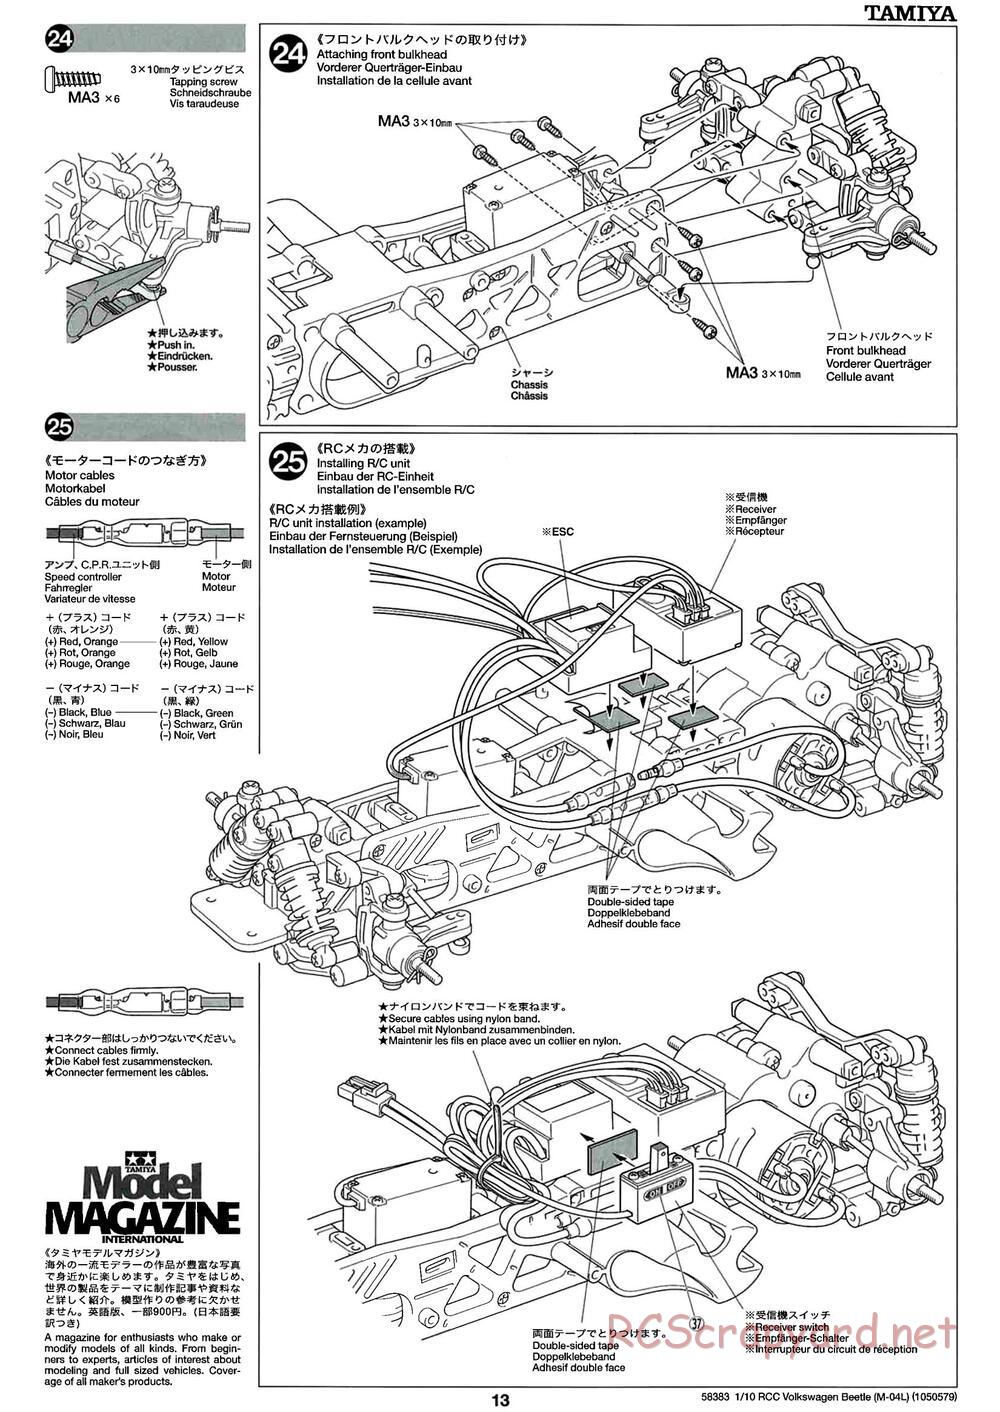 Tamiya - Volkswagen Beetle - M04L Chassis - Manual - Page 13